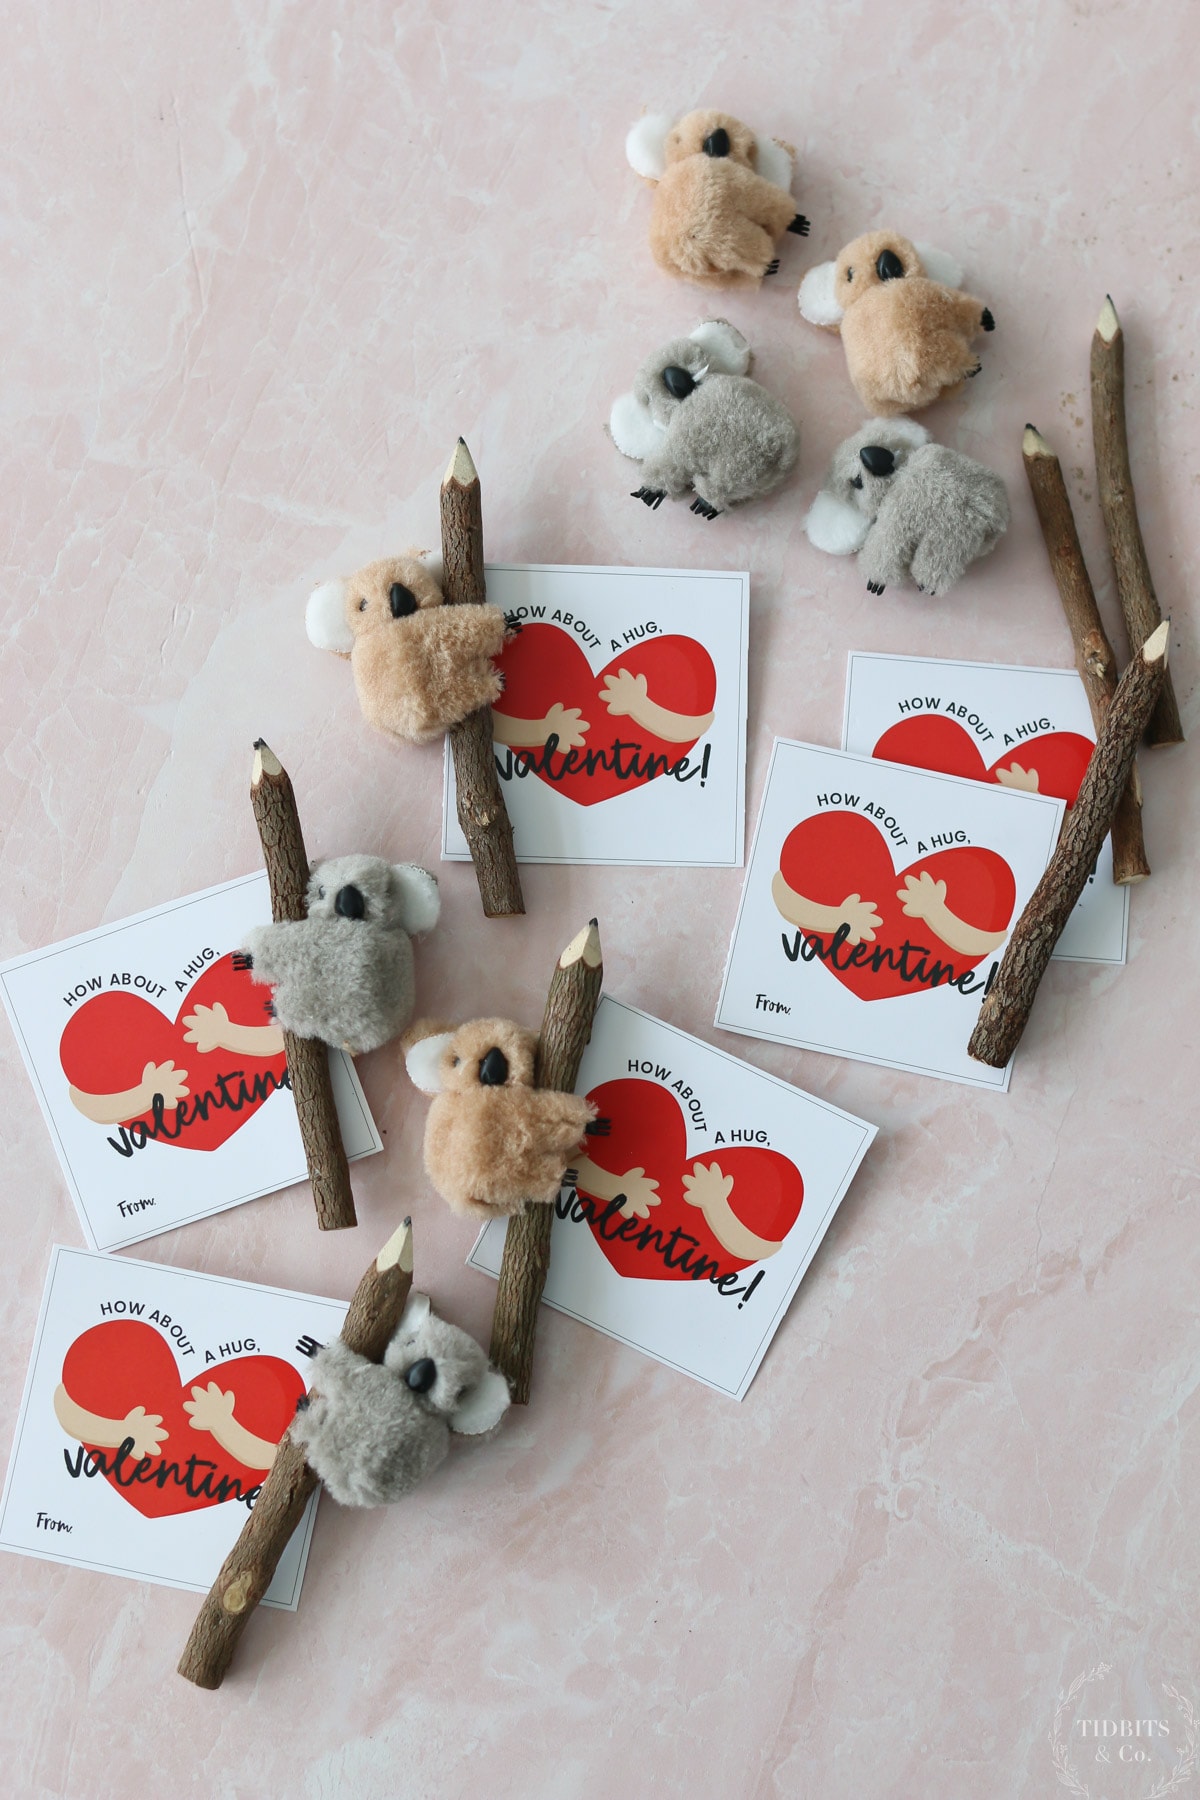 "How about a hug, Valentine!" cards and koala bears attached to pencils